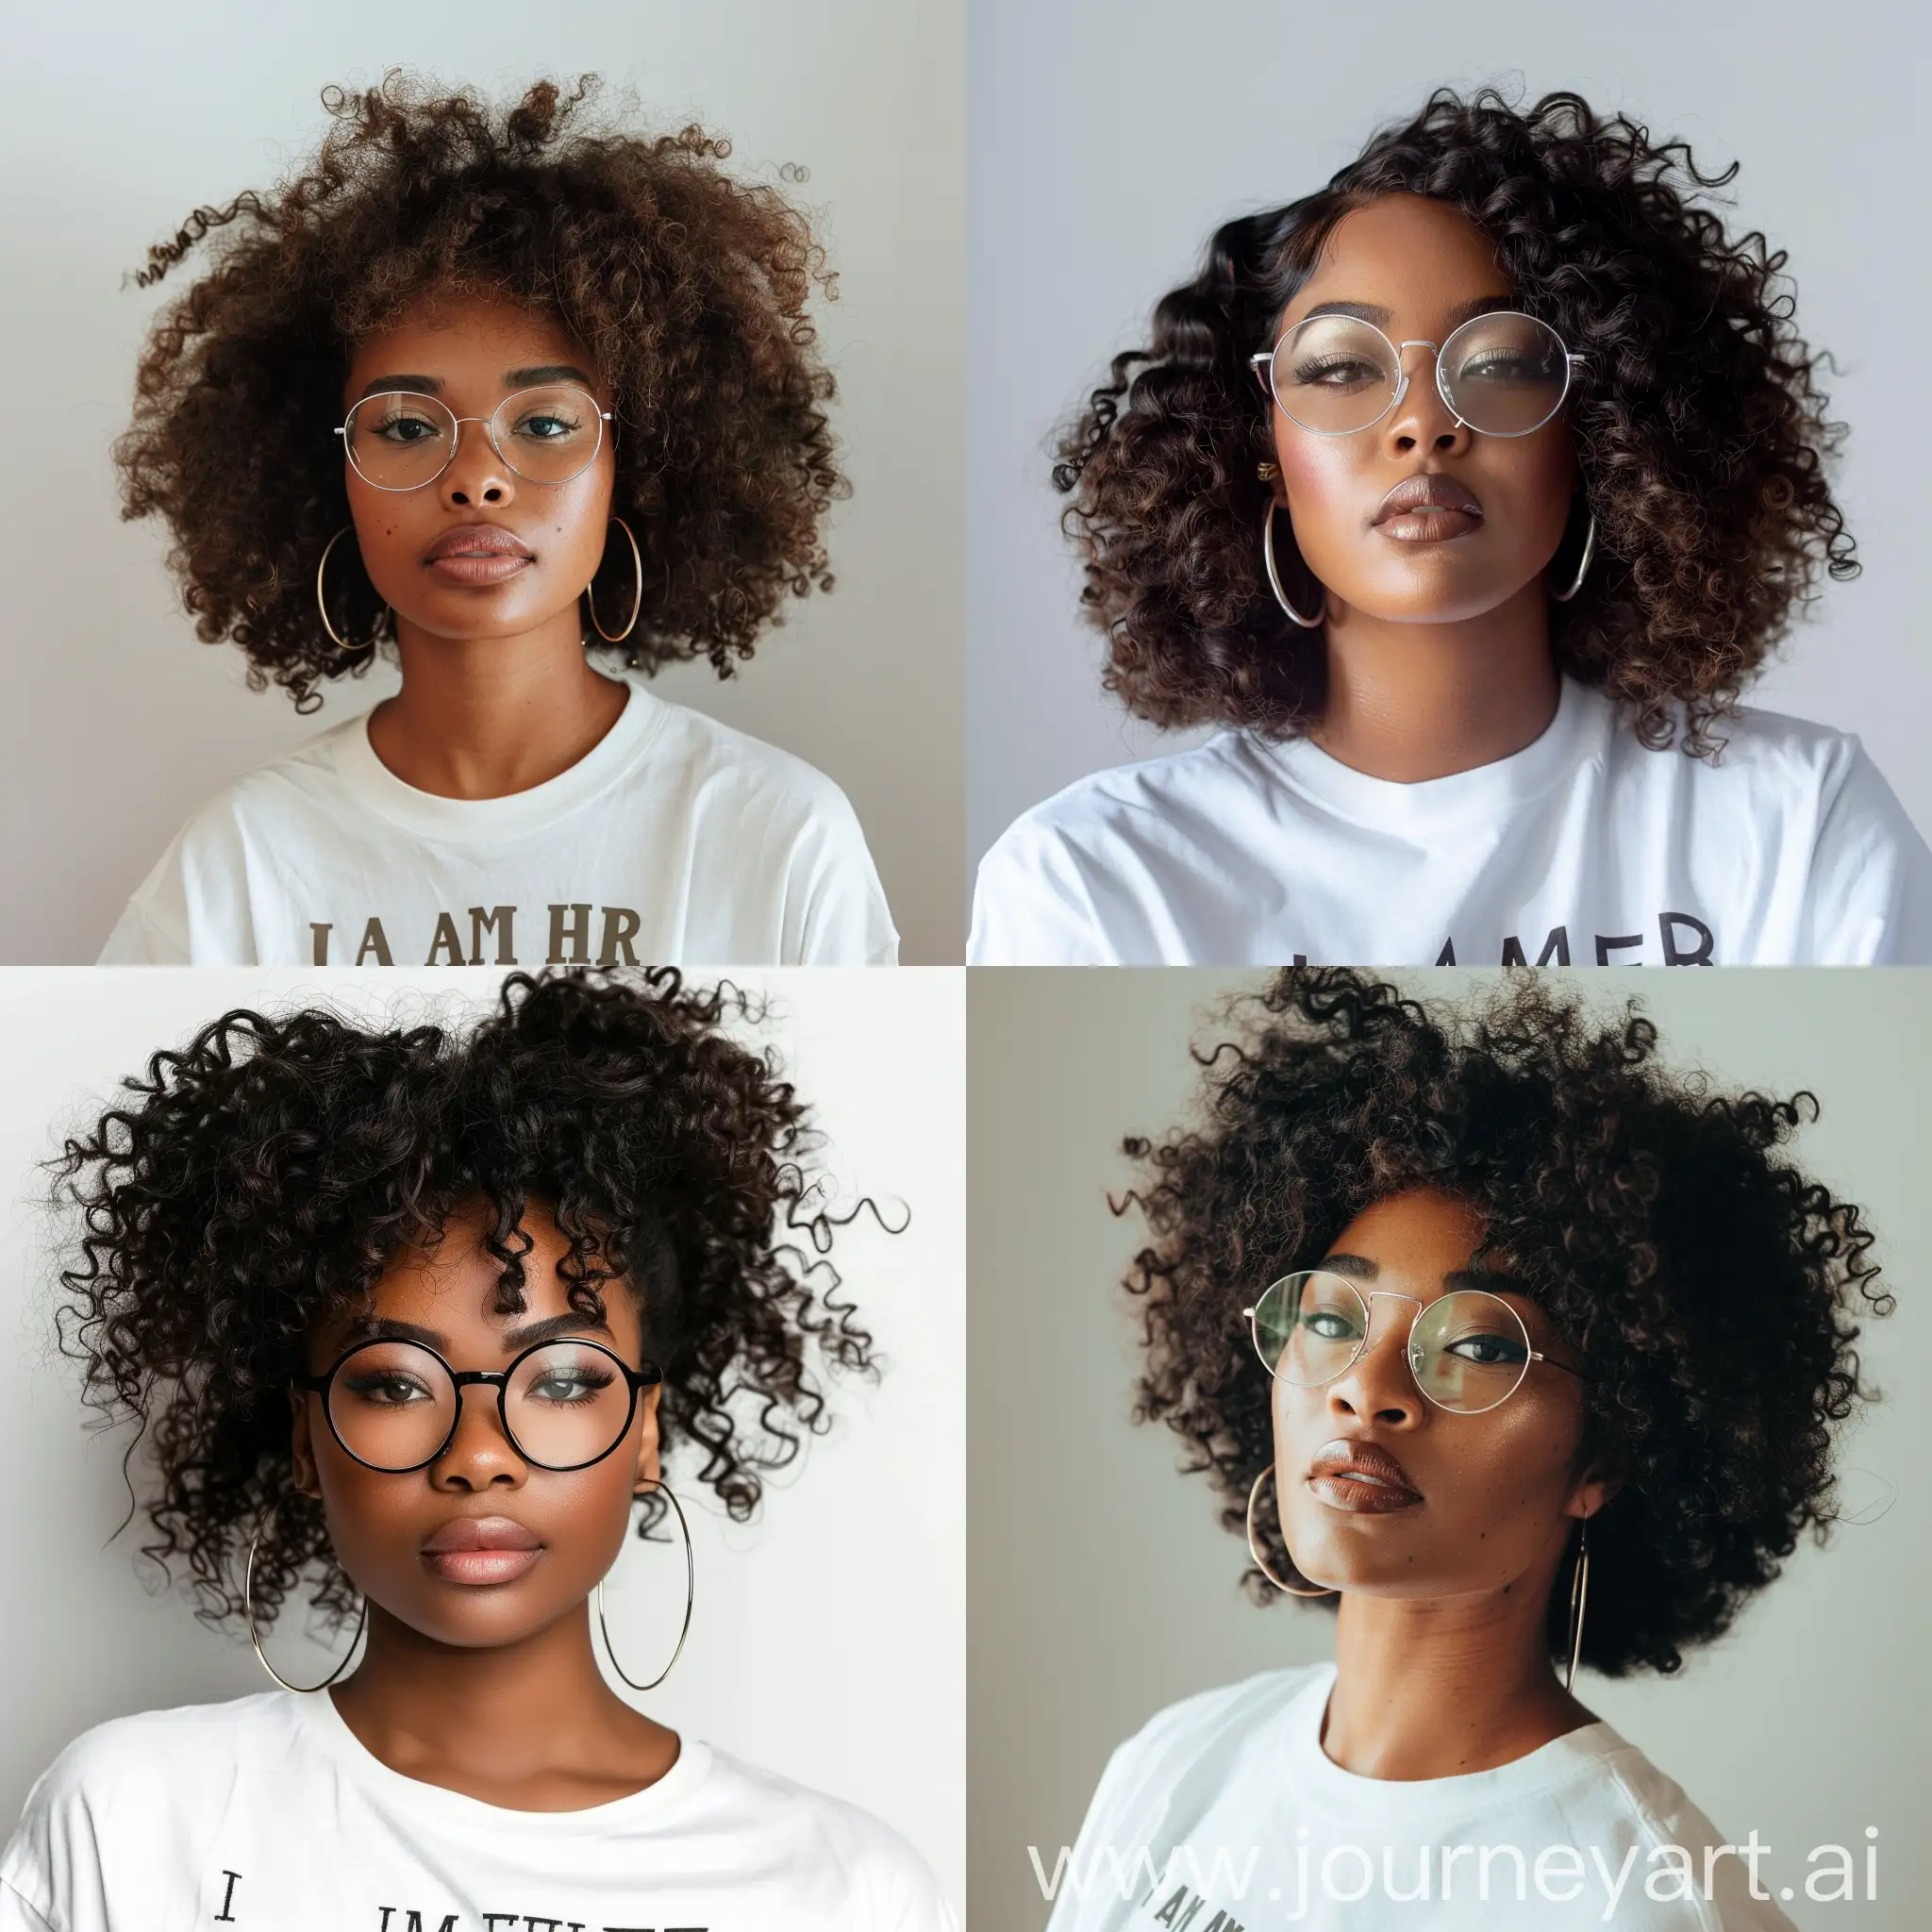 Confident-African-American-Woman-with-Curly-Hair-and-I-AM-HER-Shirt